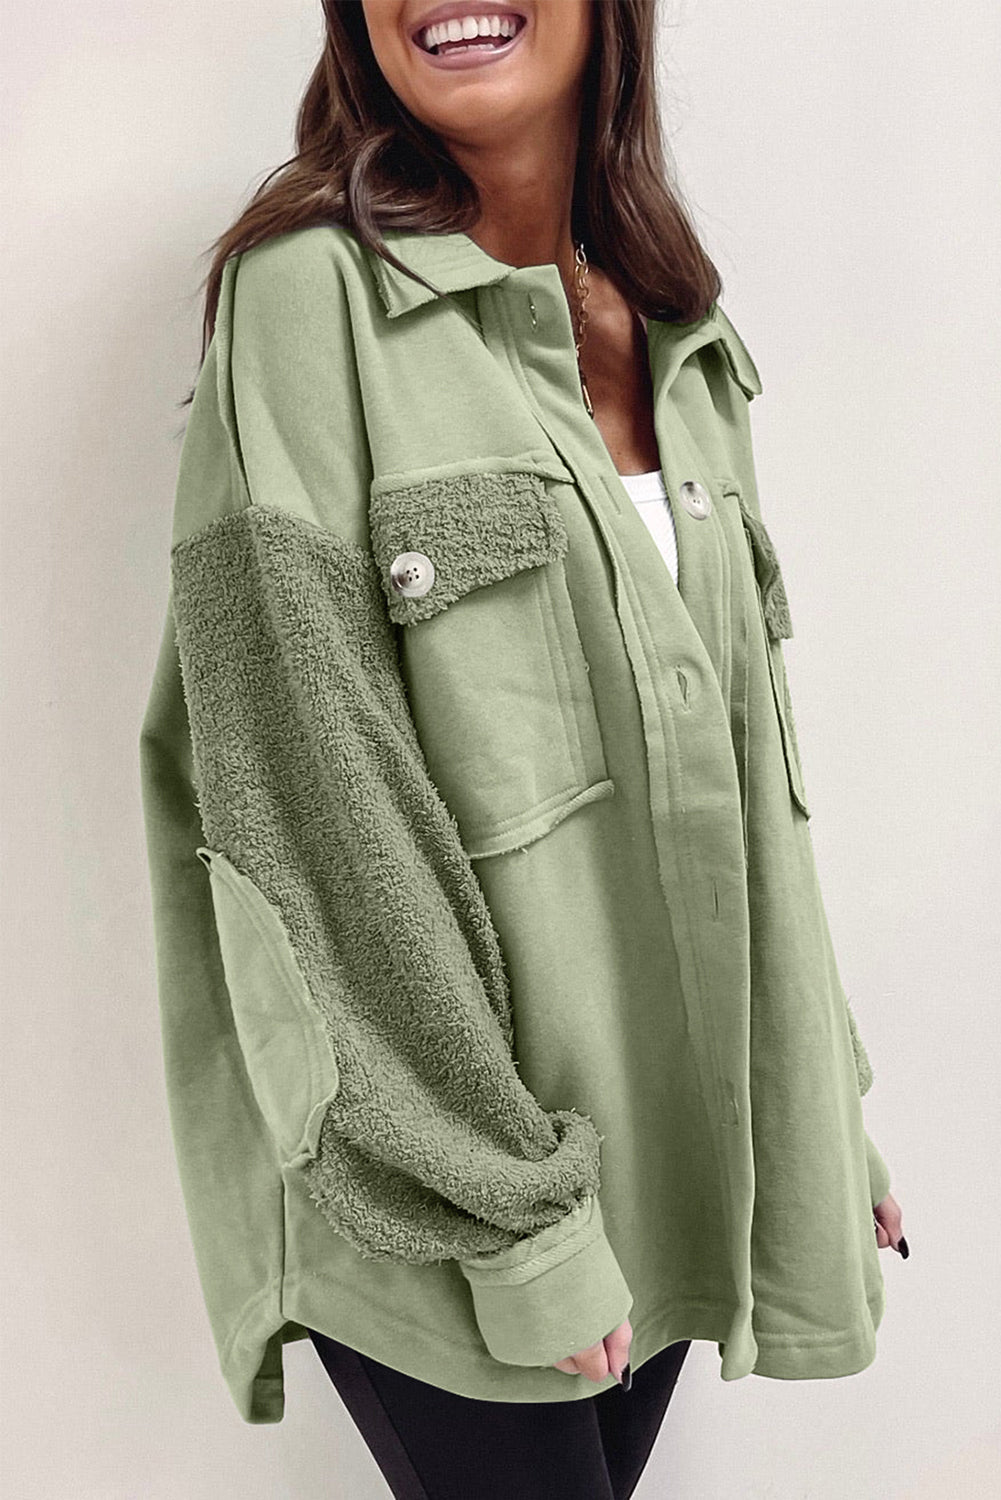 Exposed Seam Elbow Patch Oversized Shacket in Peach Blossom, Sage, or Chestnut - women's shacket at TFC&H Co.